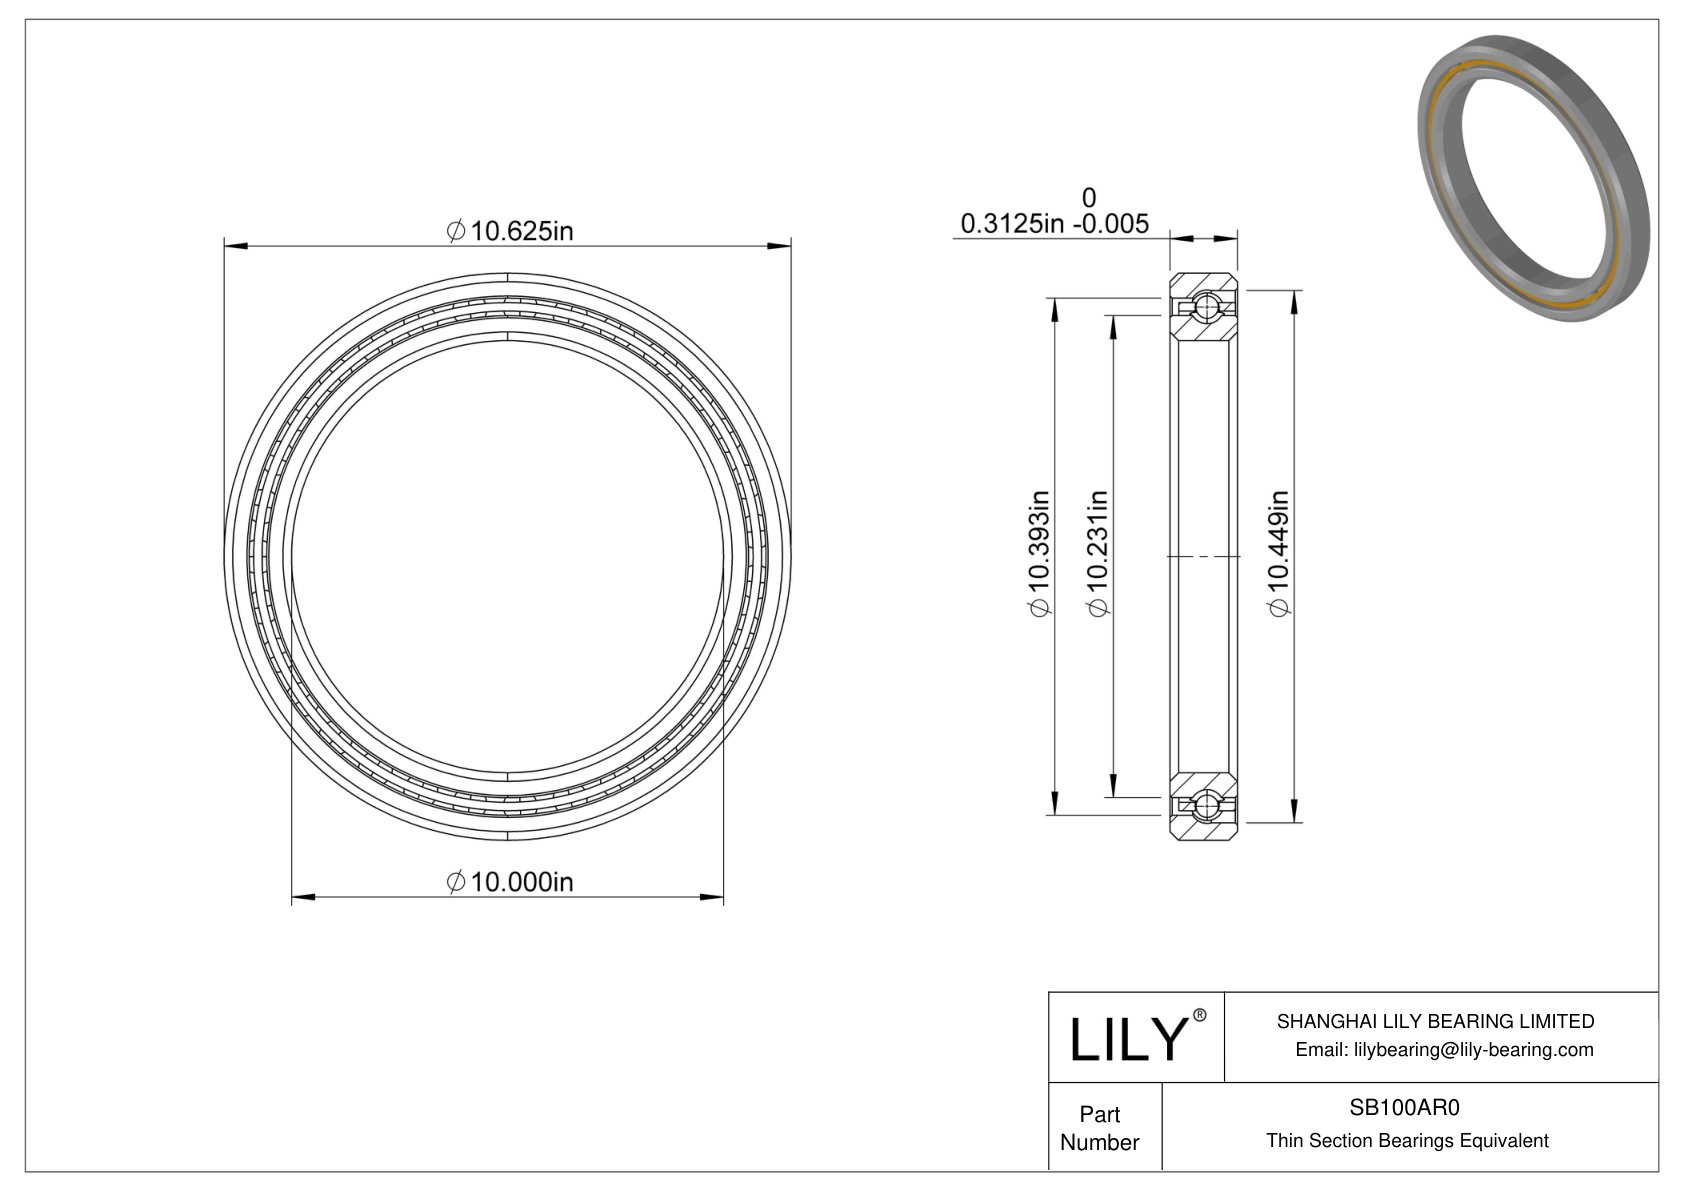 SB100AR0 Constant Section (CS) Bearings cad drawing